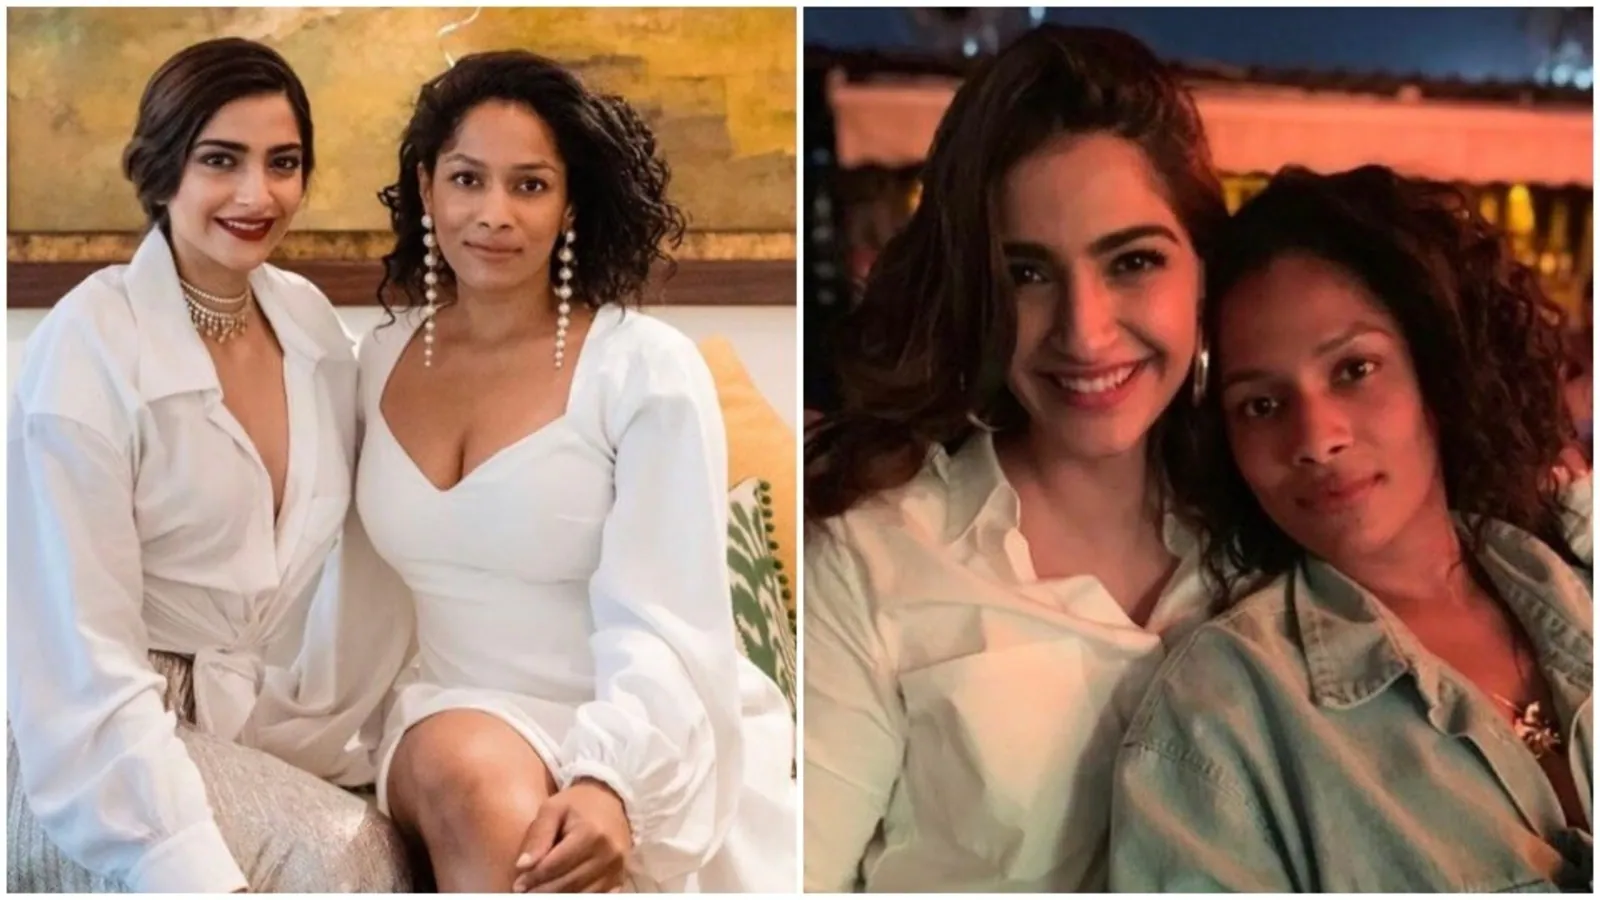 Masaba Gupta is ‘very happy’ for childhood friend Sonam Kapoor: ‘She will make a great mom’